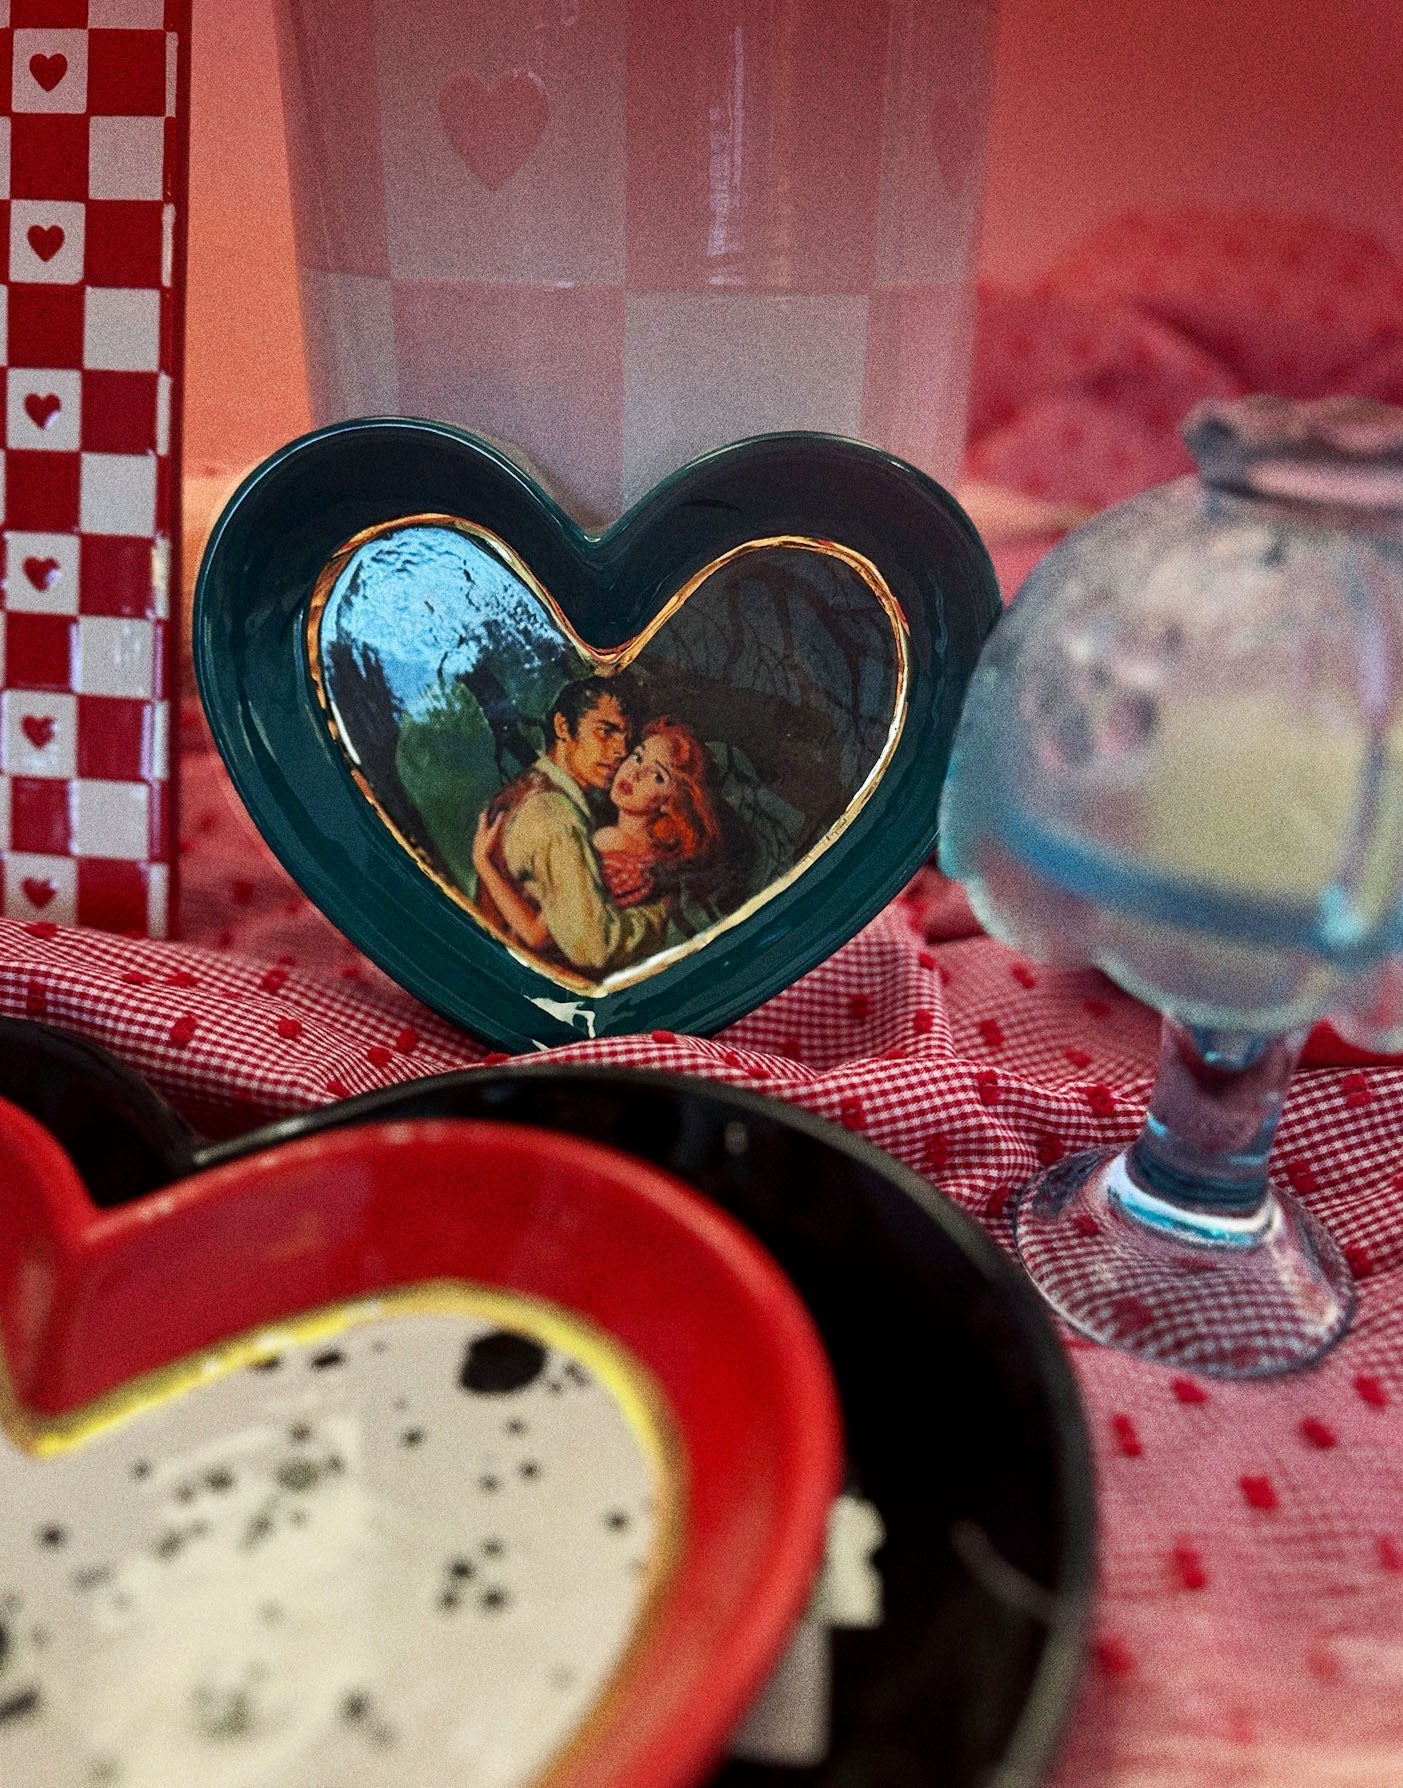 Large Checkered Heart Dishes